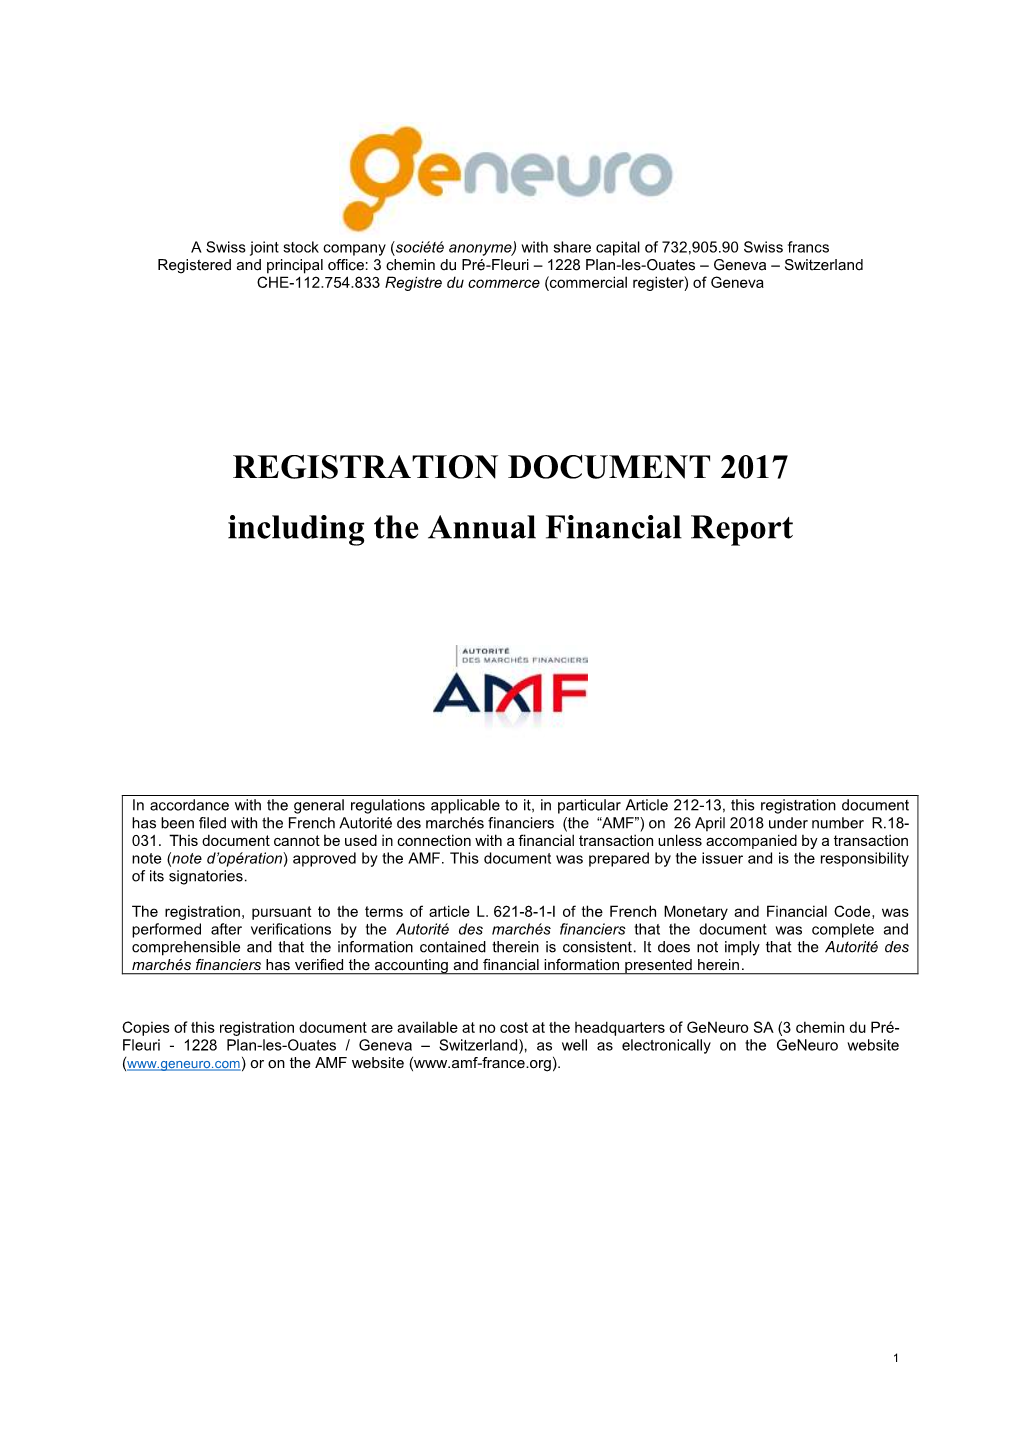 REGISTRATION DOCUMENT 2017 Including the Annual Financial Report